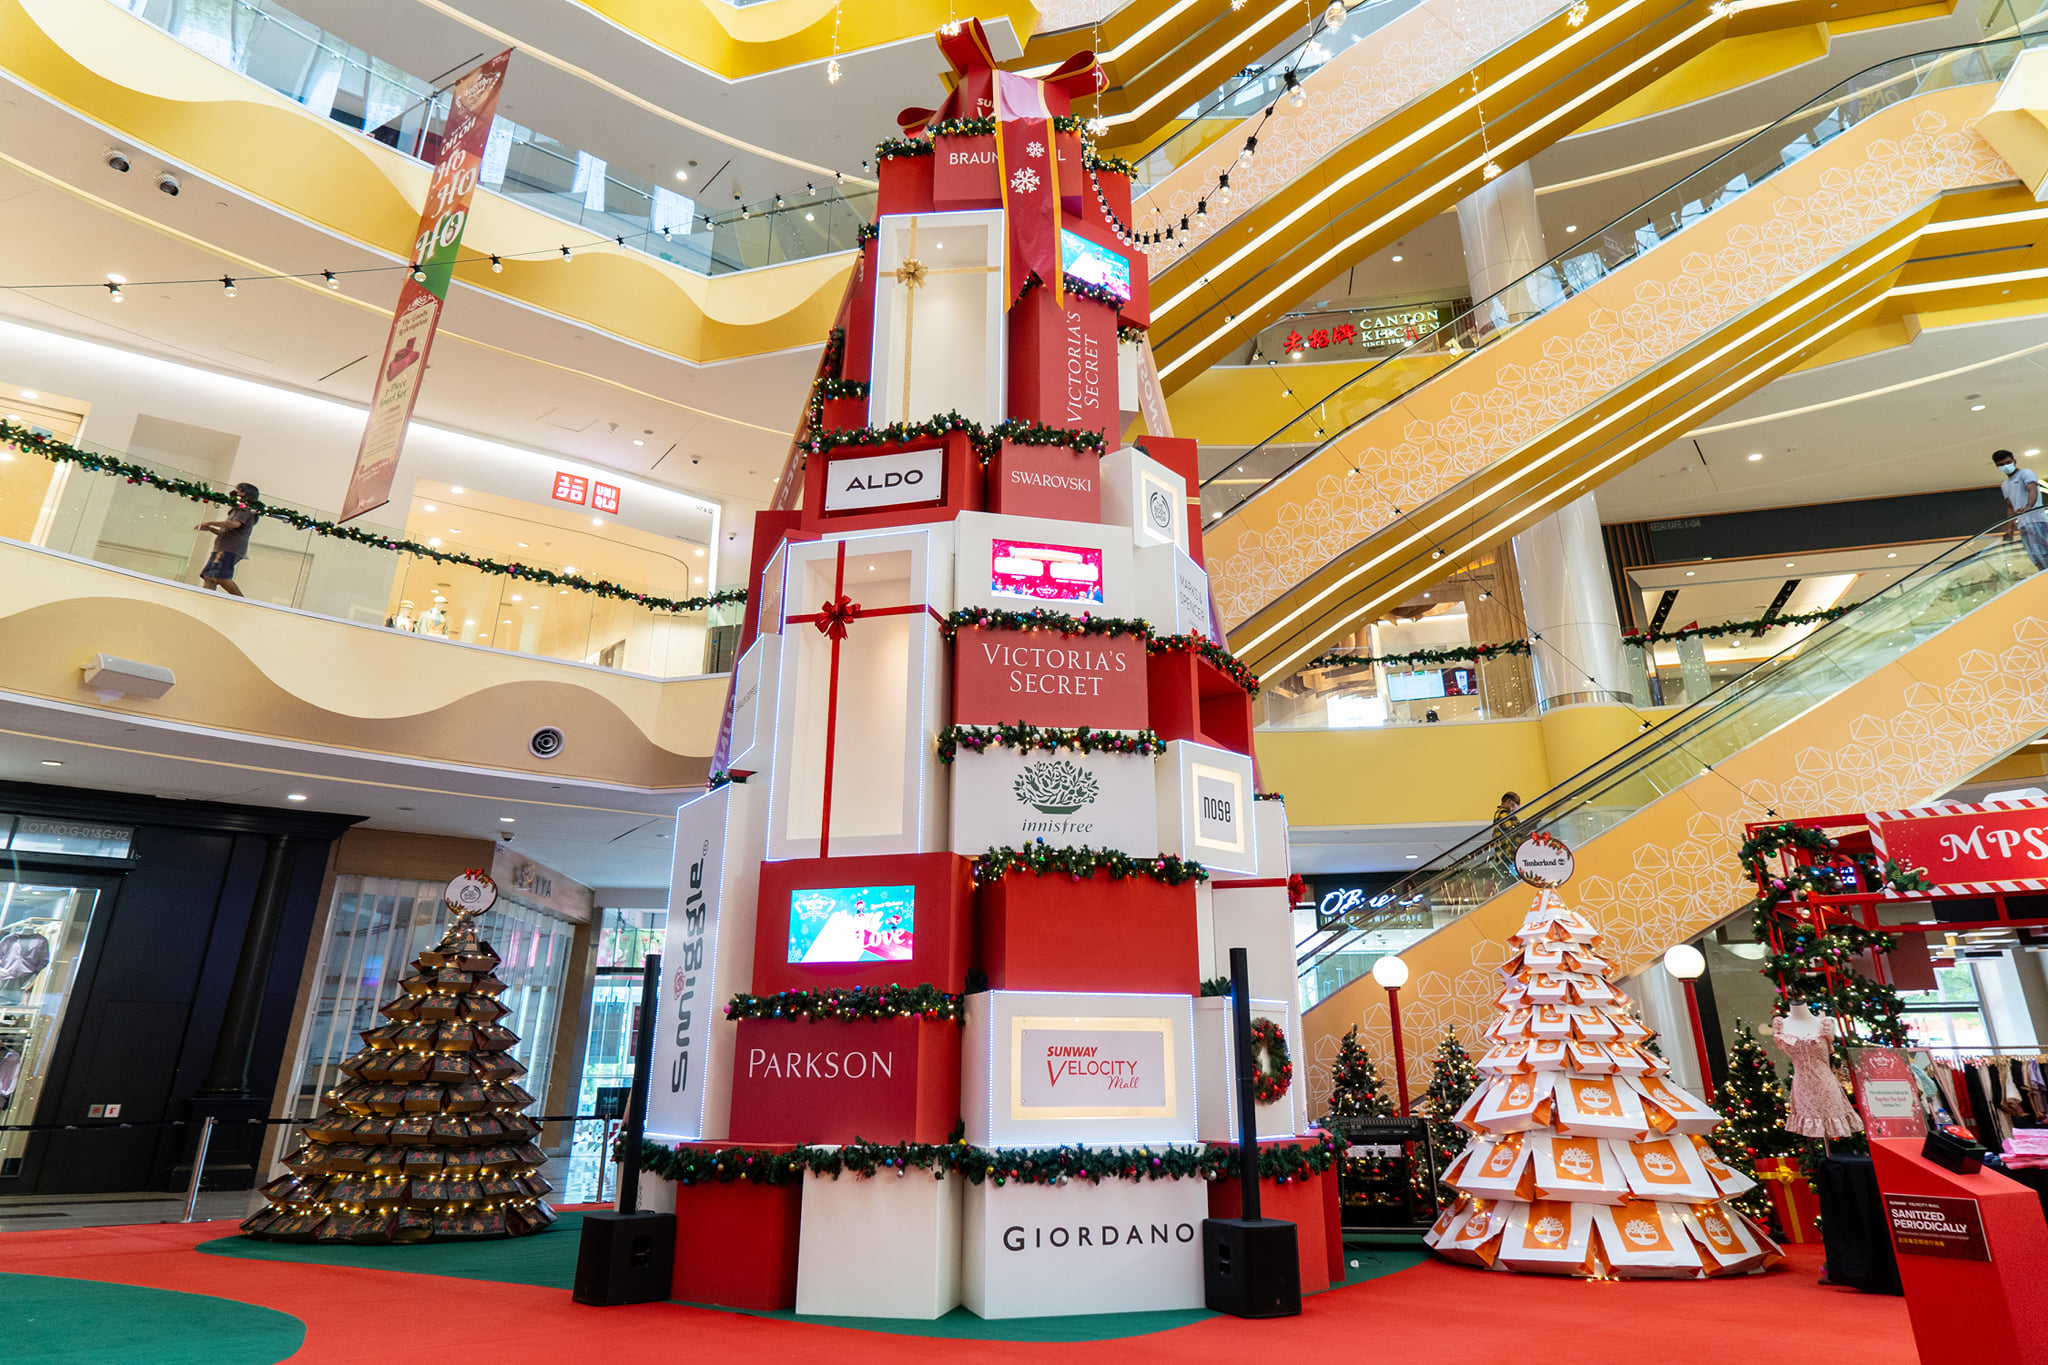 Christmas decorations displayed at shopping mall in Malaysia (15) -  People's Daily Online